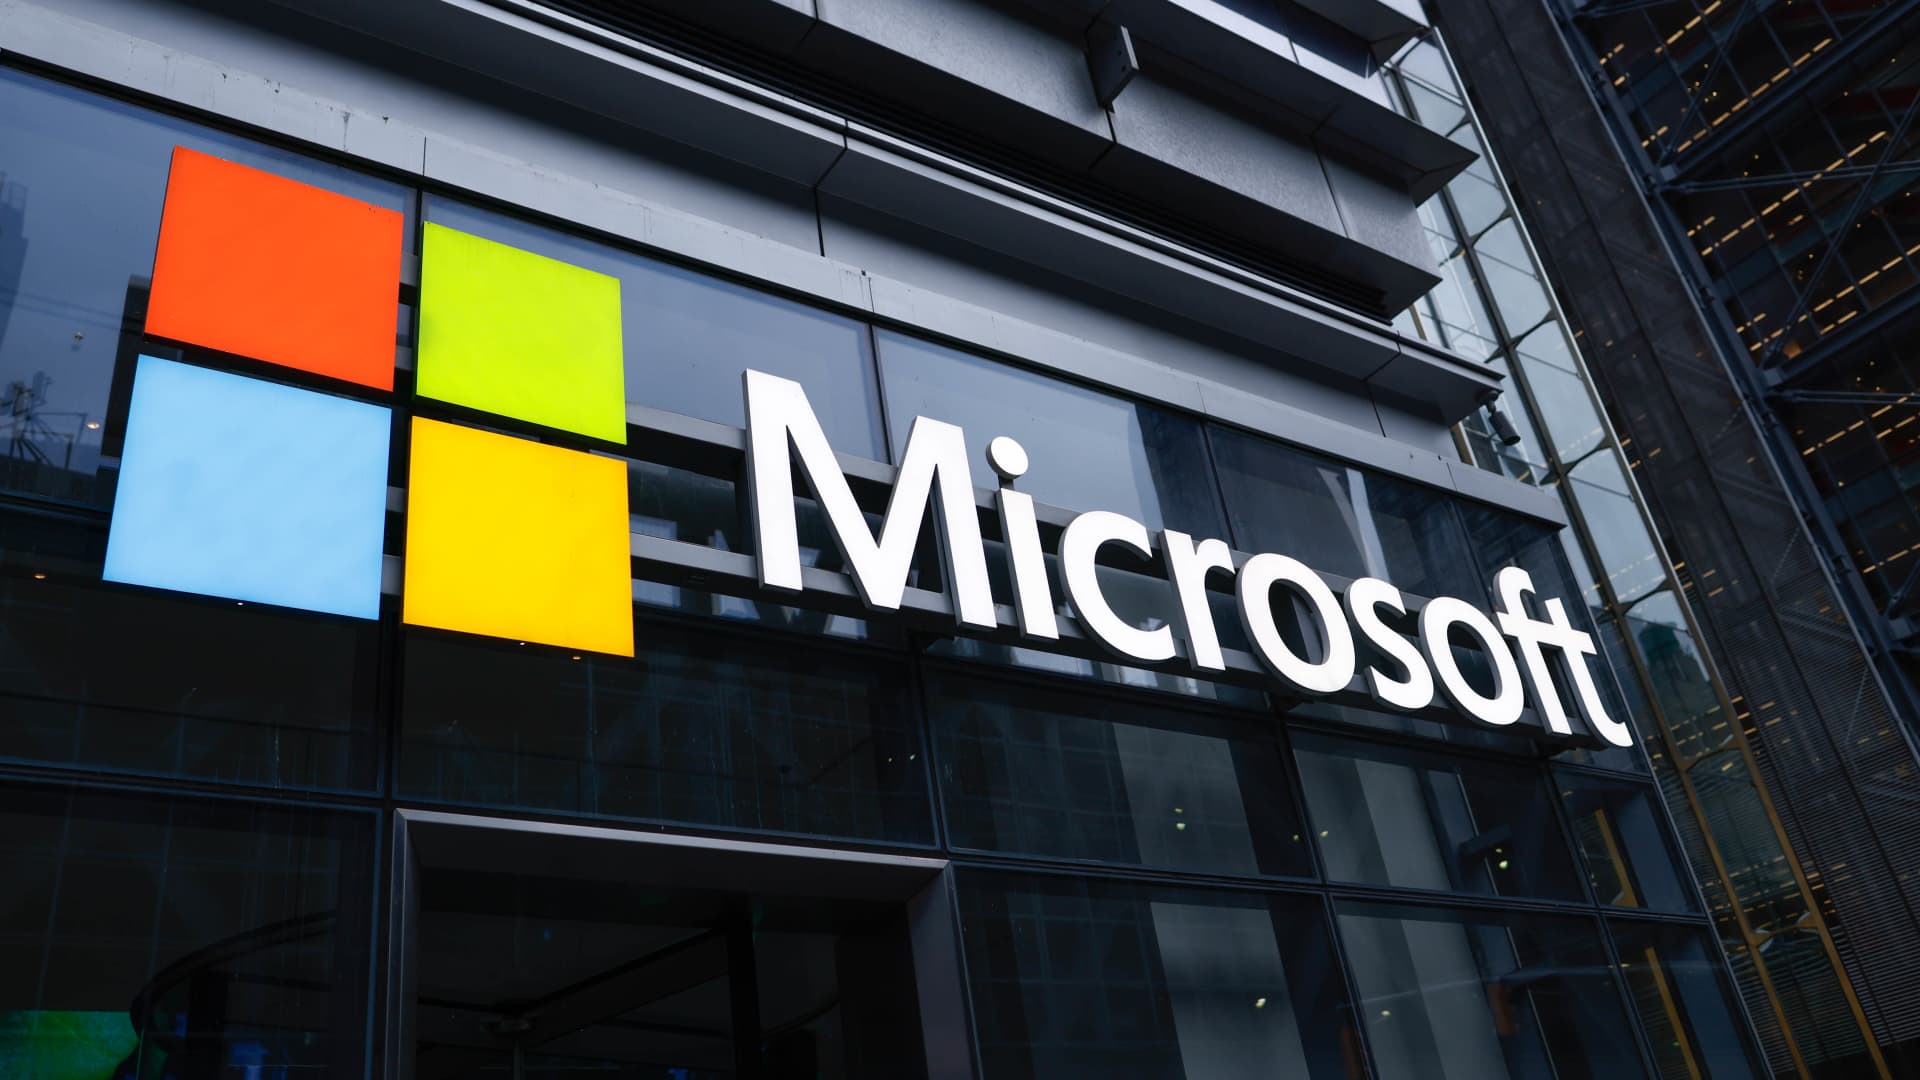 Microsoft to separate Teams and Office globally amid antitrust scrutiny